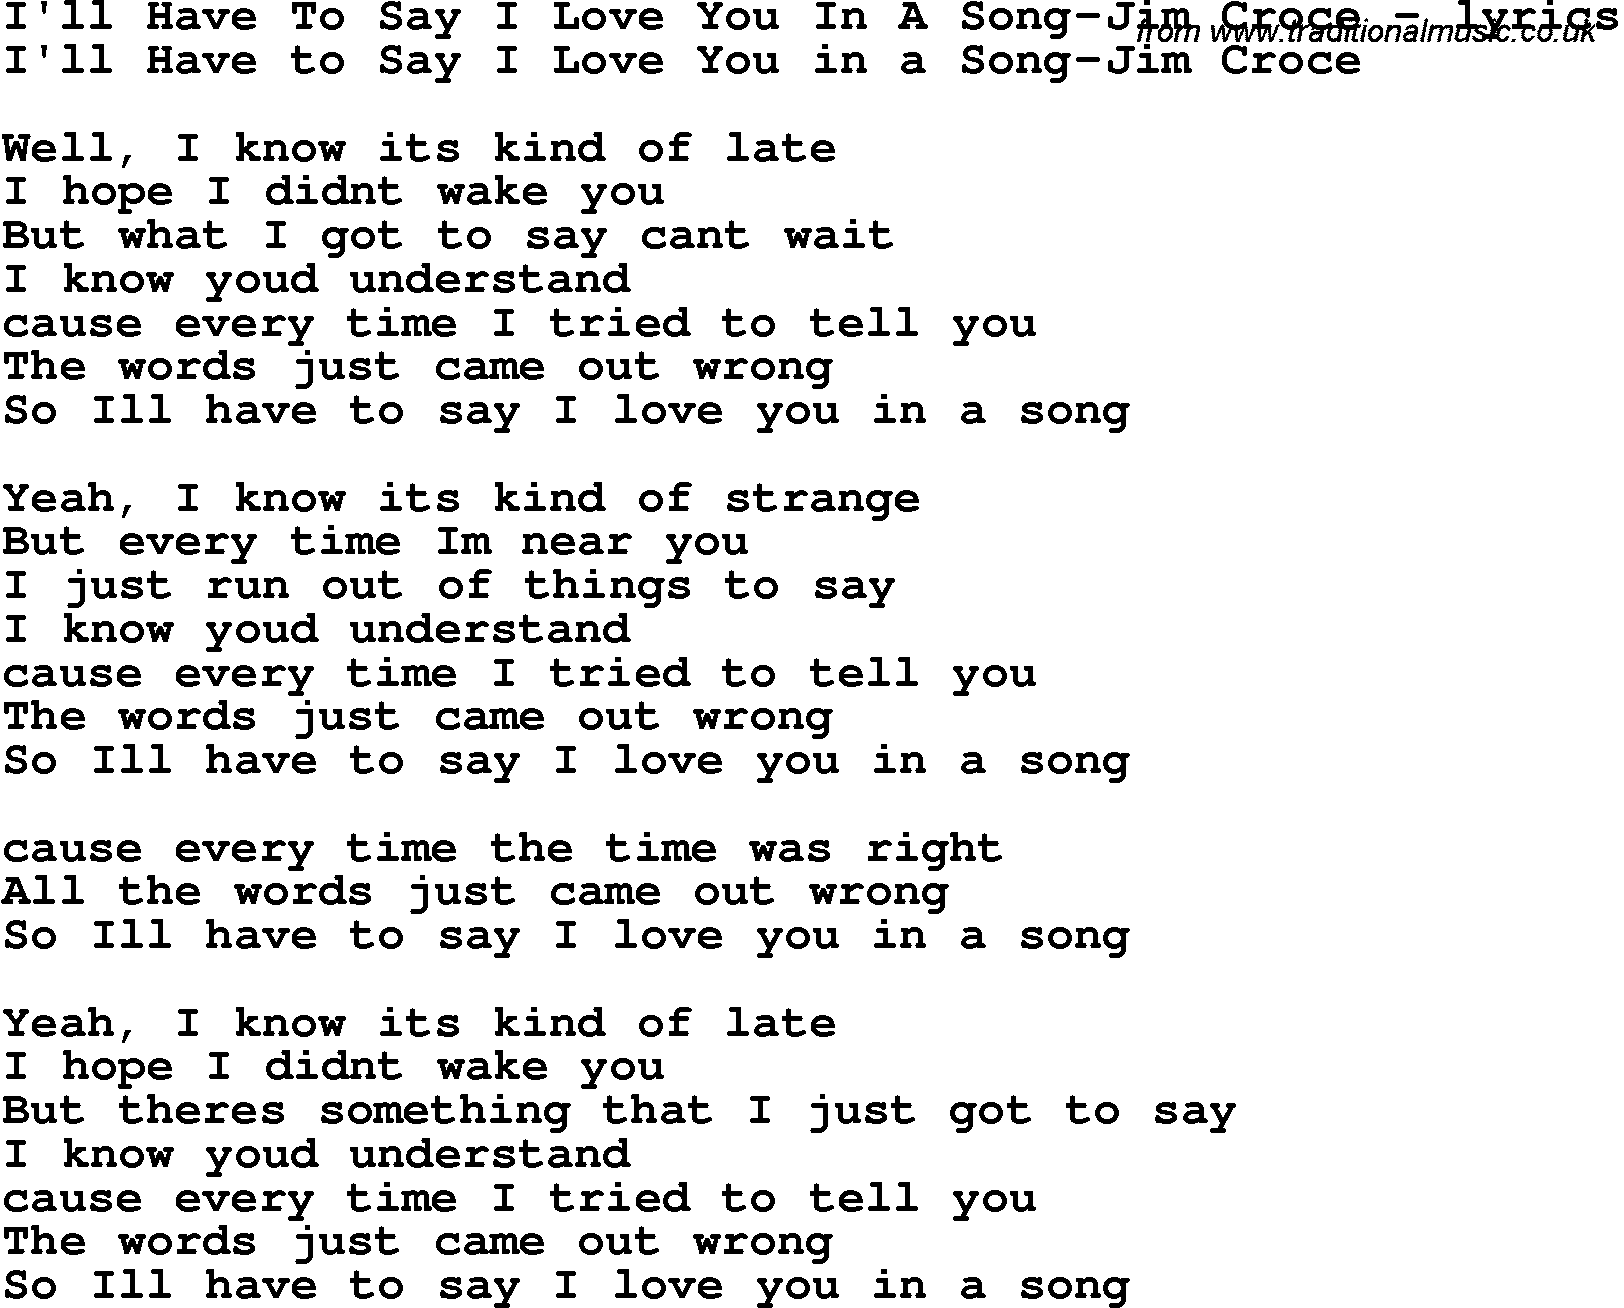 Love Song Lyrics for: I'll Have To Say I Love You In A Song-Jim Croce